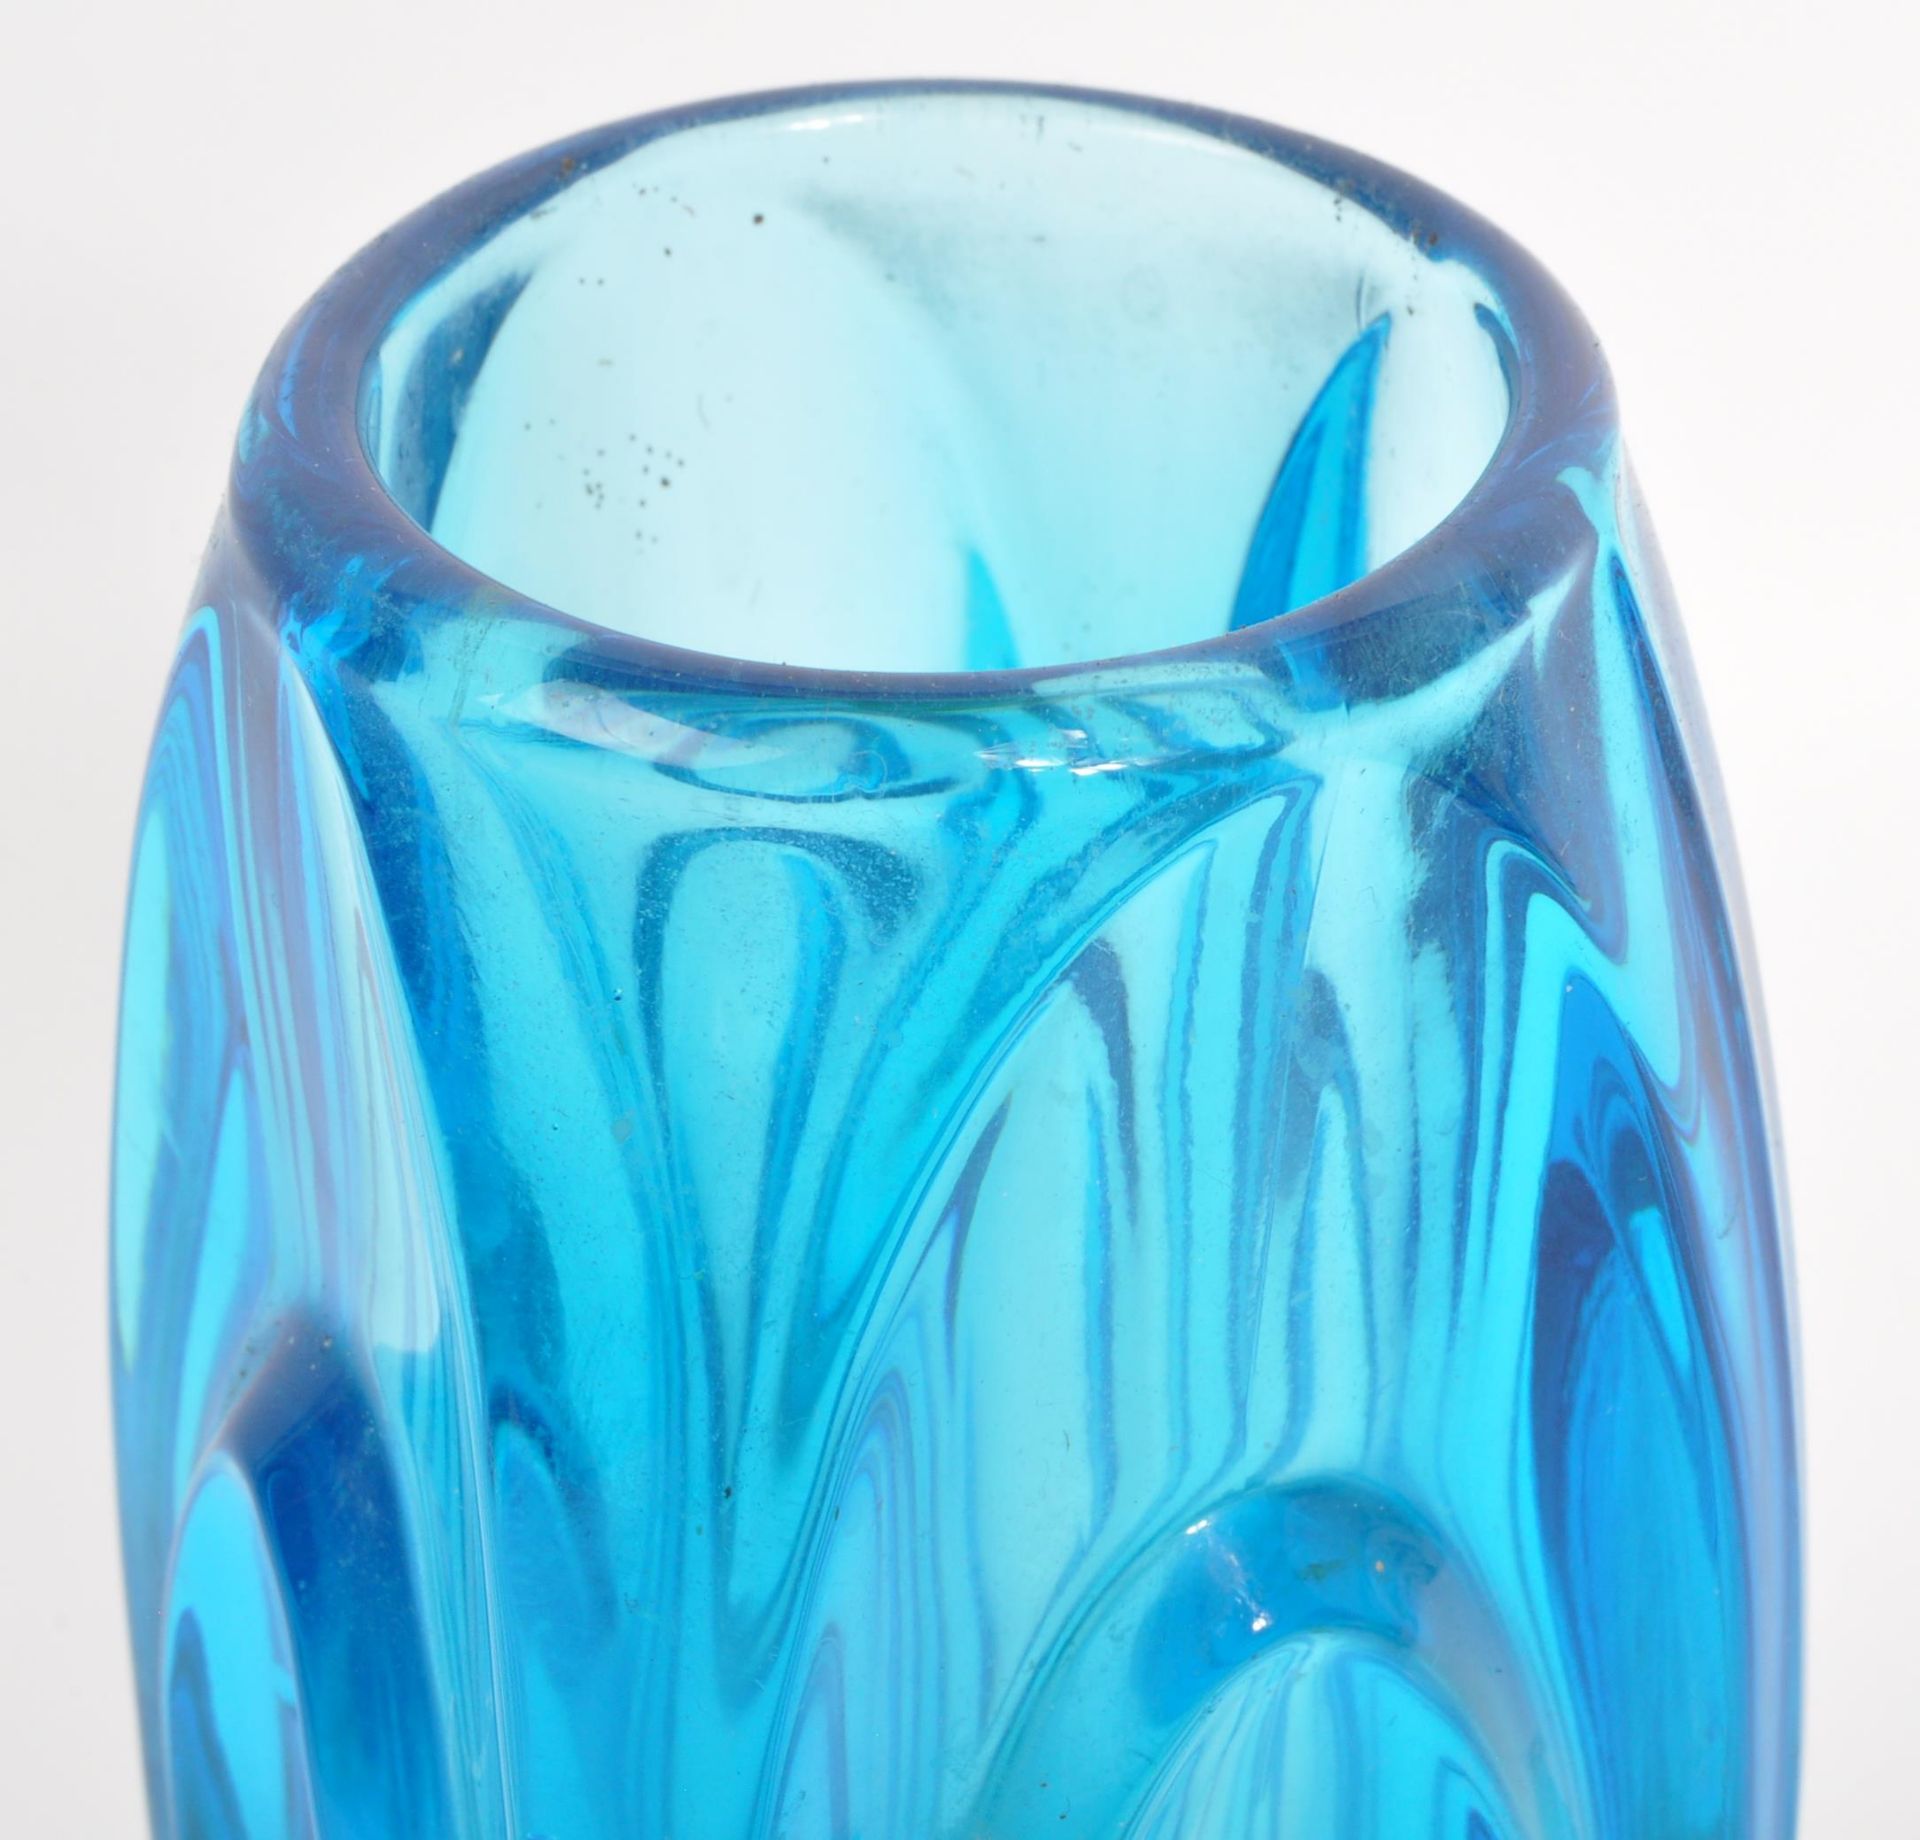 COLLECTION OF MID CENTURY WHITEFRIARS / SKLO UNION ART GLASS - Image 6 of 6